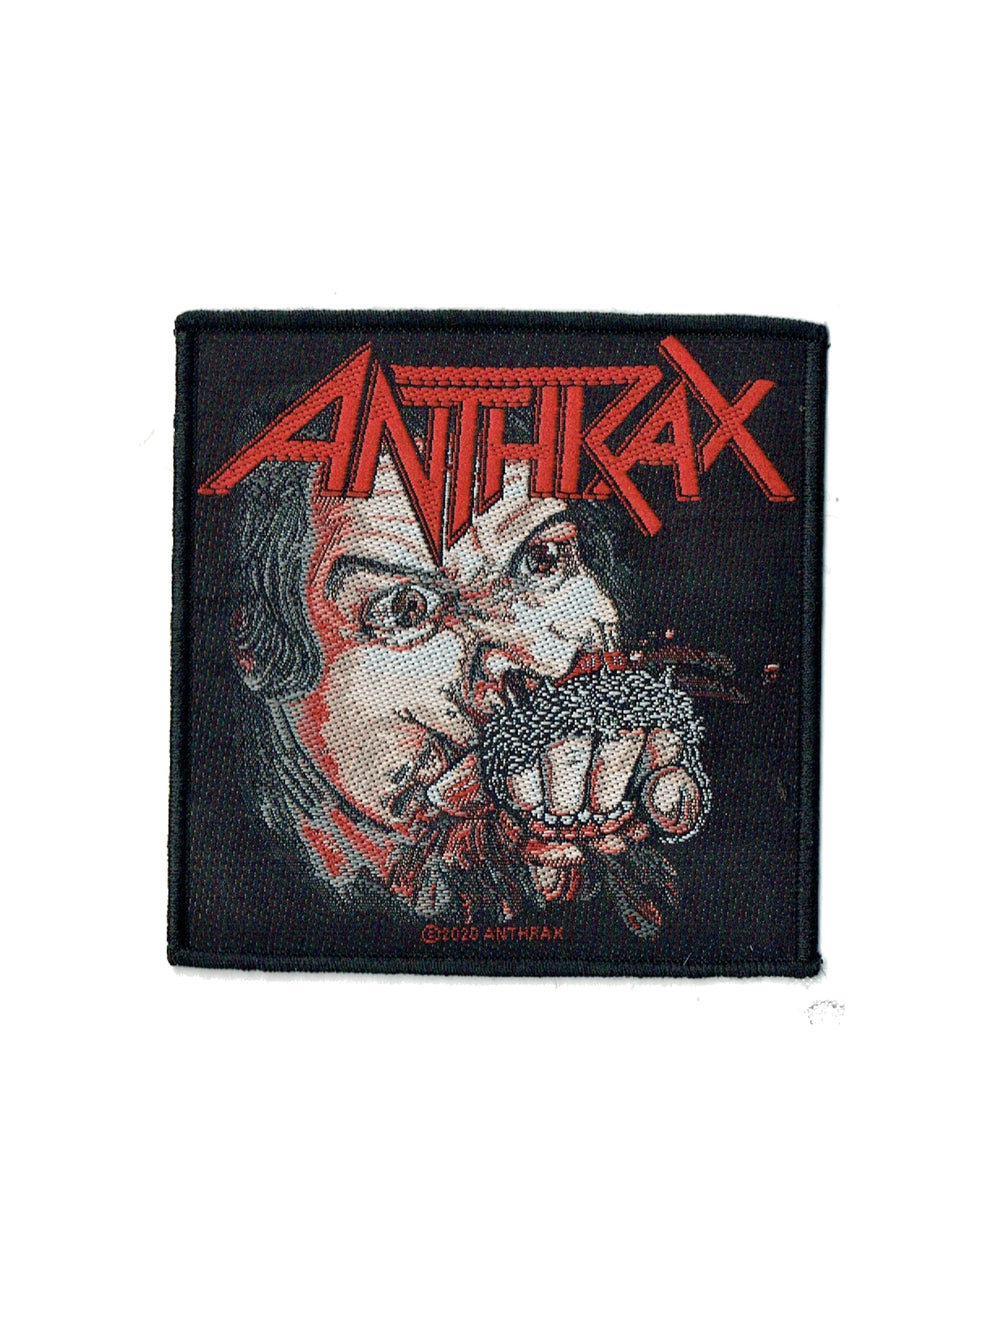 Anthrax Fistful Of Metal Official Woven Patch Brand New